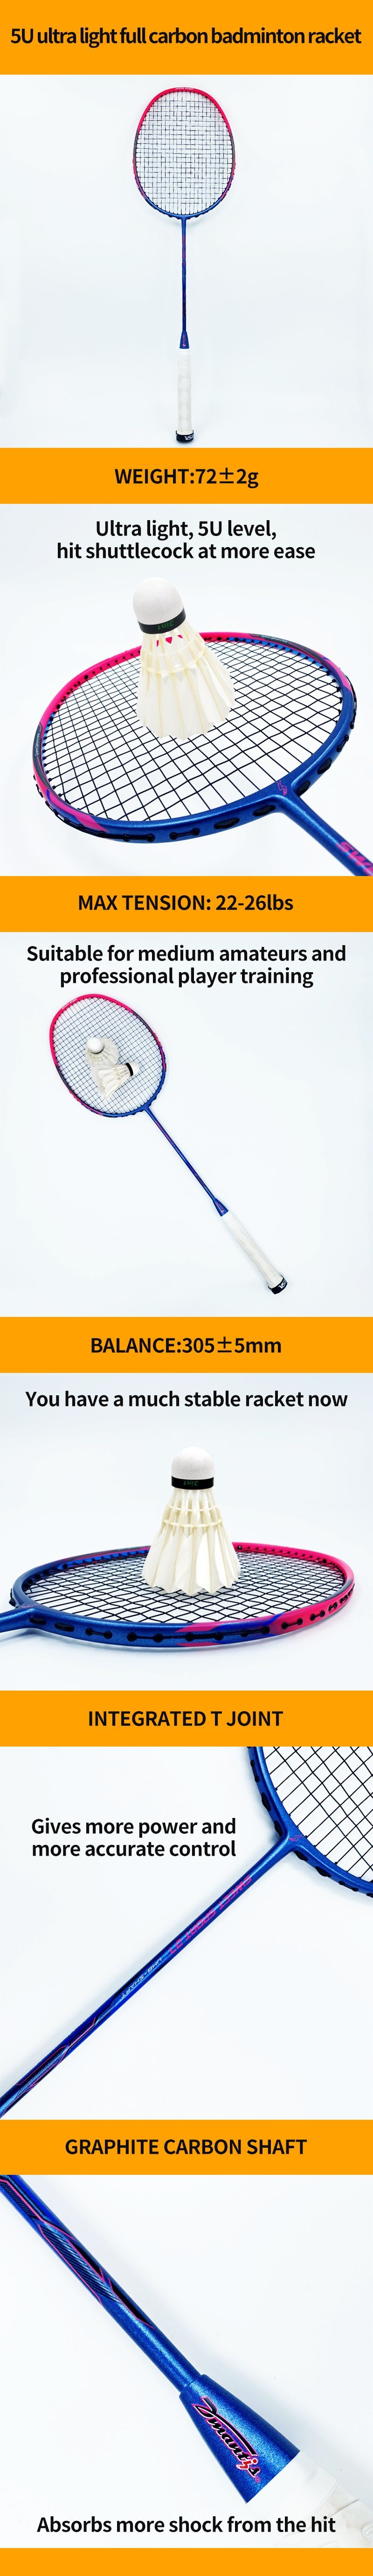 Dmantis Hot Sell Badminton Racket Set Wholesale Factory Offer Carbon Fiber Frame for Play and Training